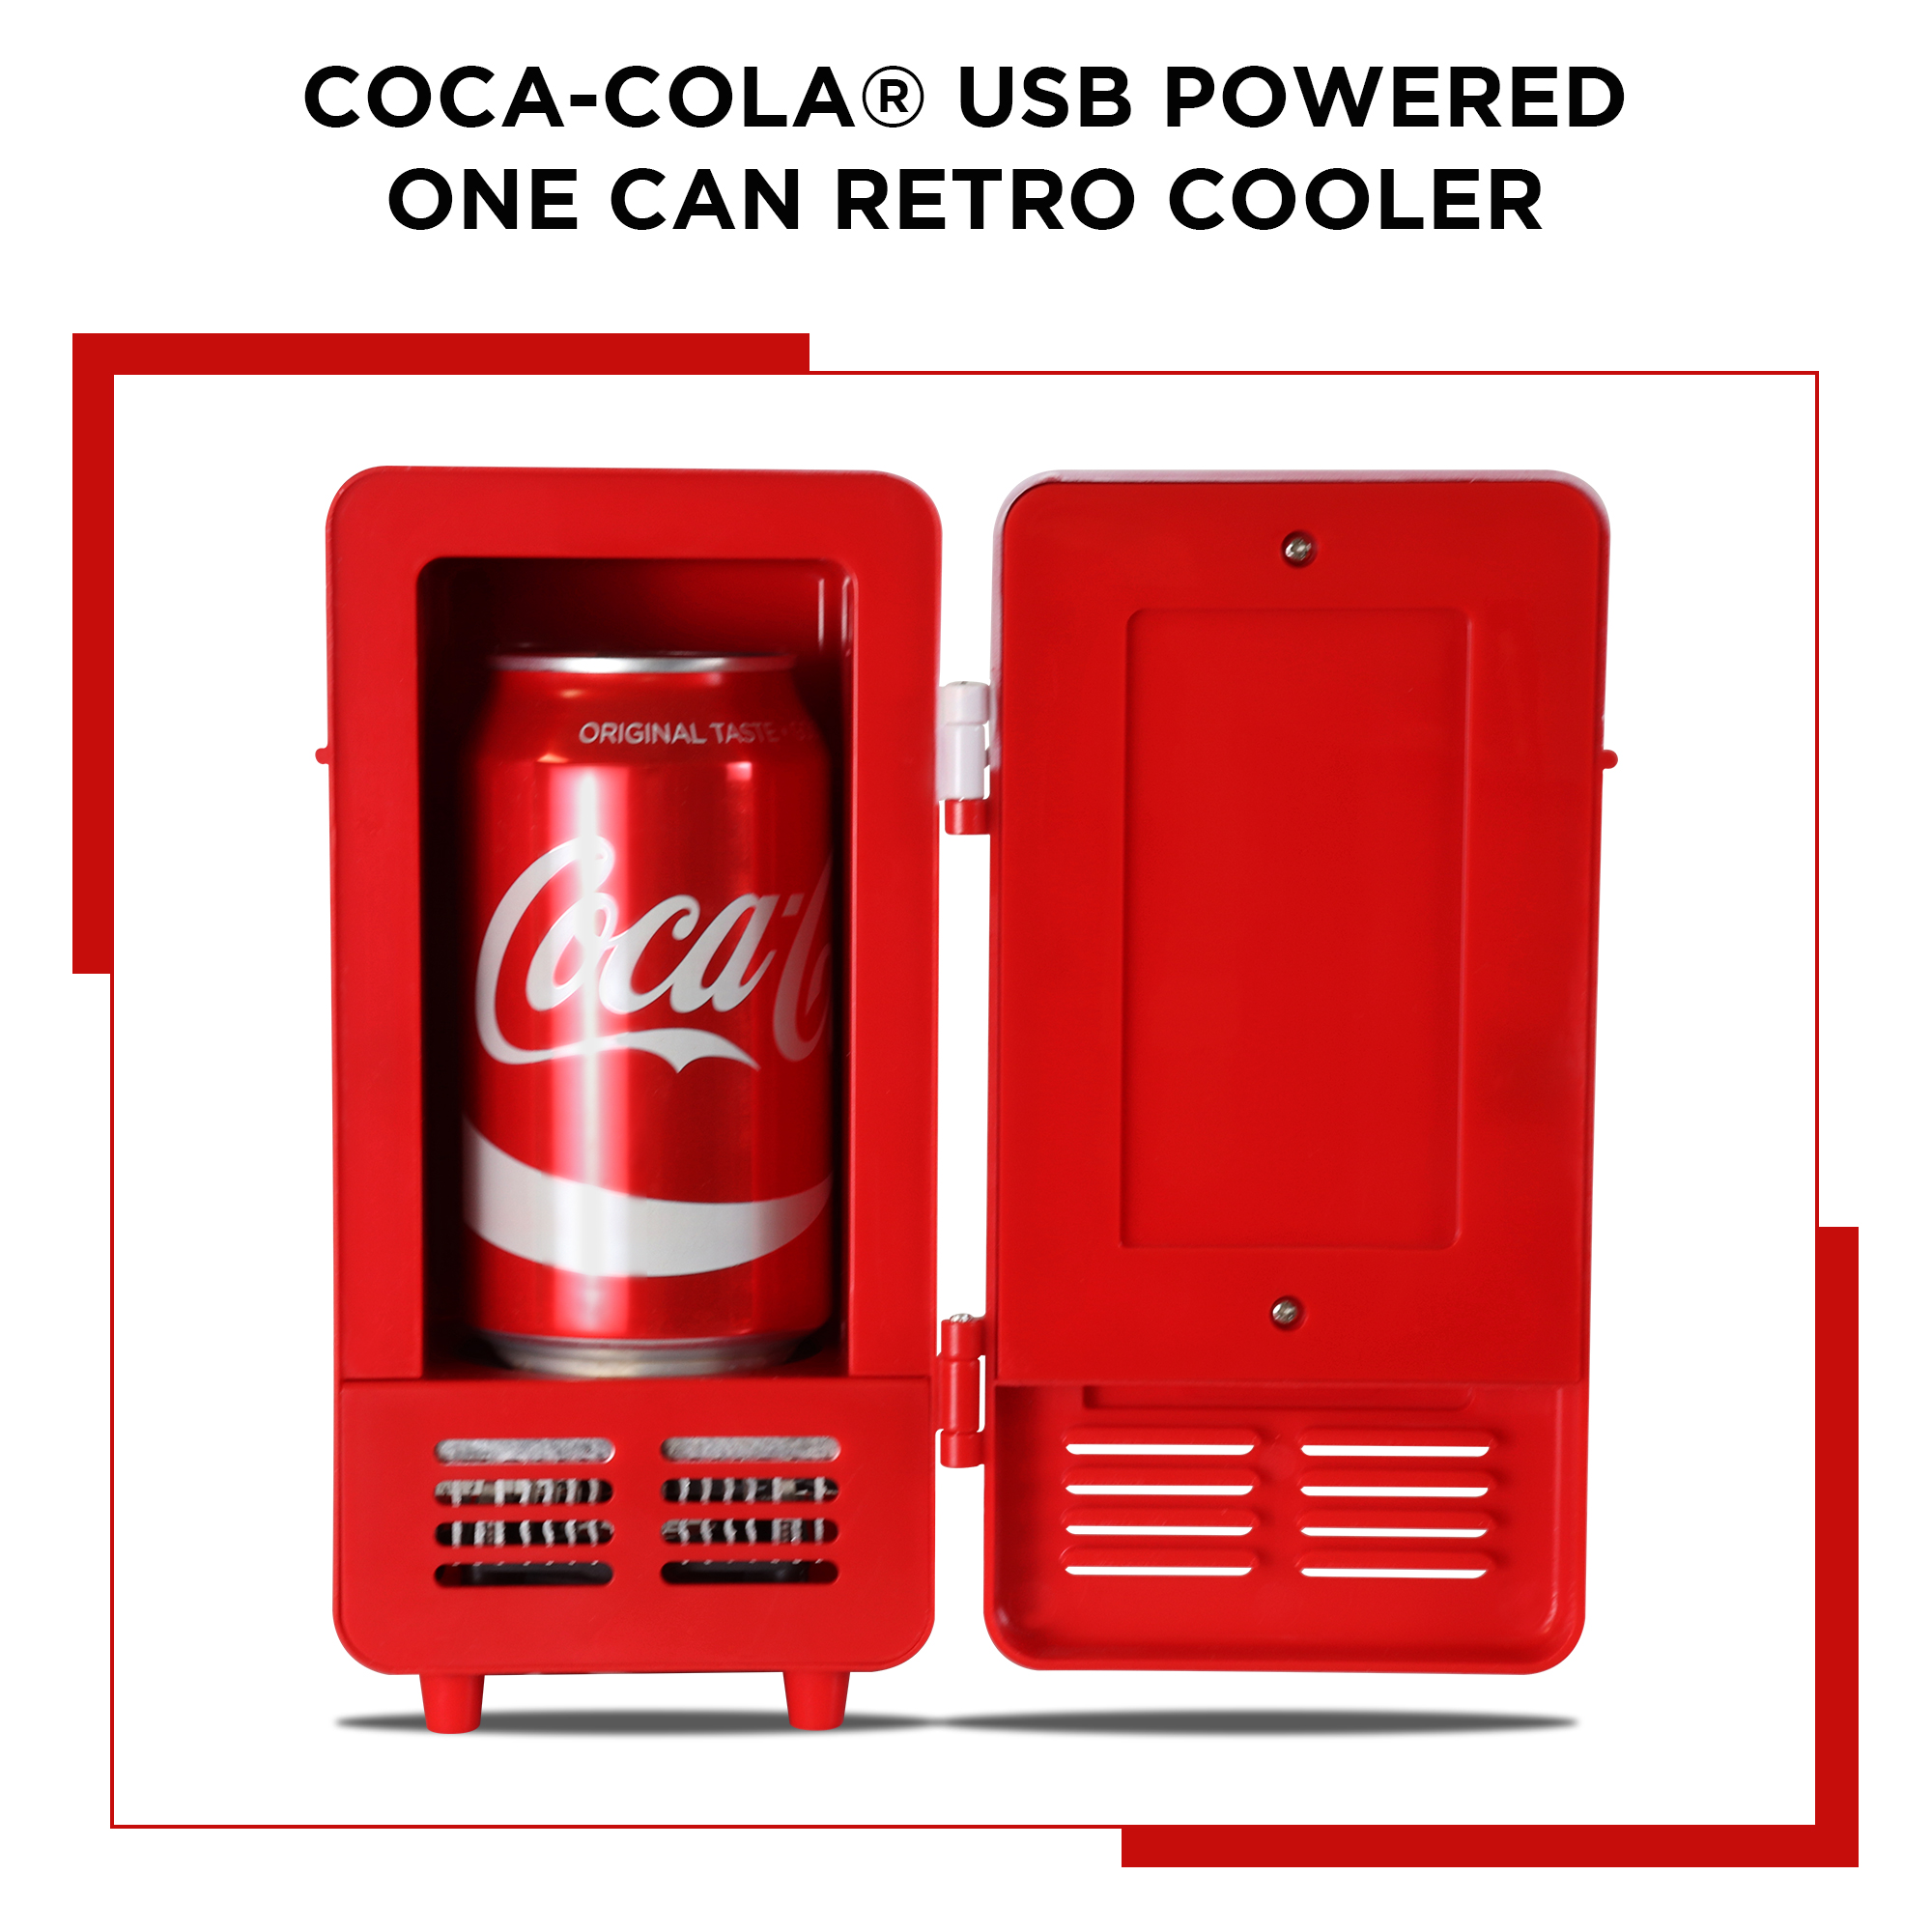 Coca-Cola Single Can Cooler, Red, USB Powered Retro One Can Mini Fridge, Thermoelectric Cooler for Desk, Home, Office, Dorm, Unique Gift for Students or Office Workers - image 3 of 5